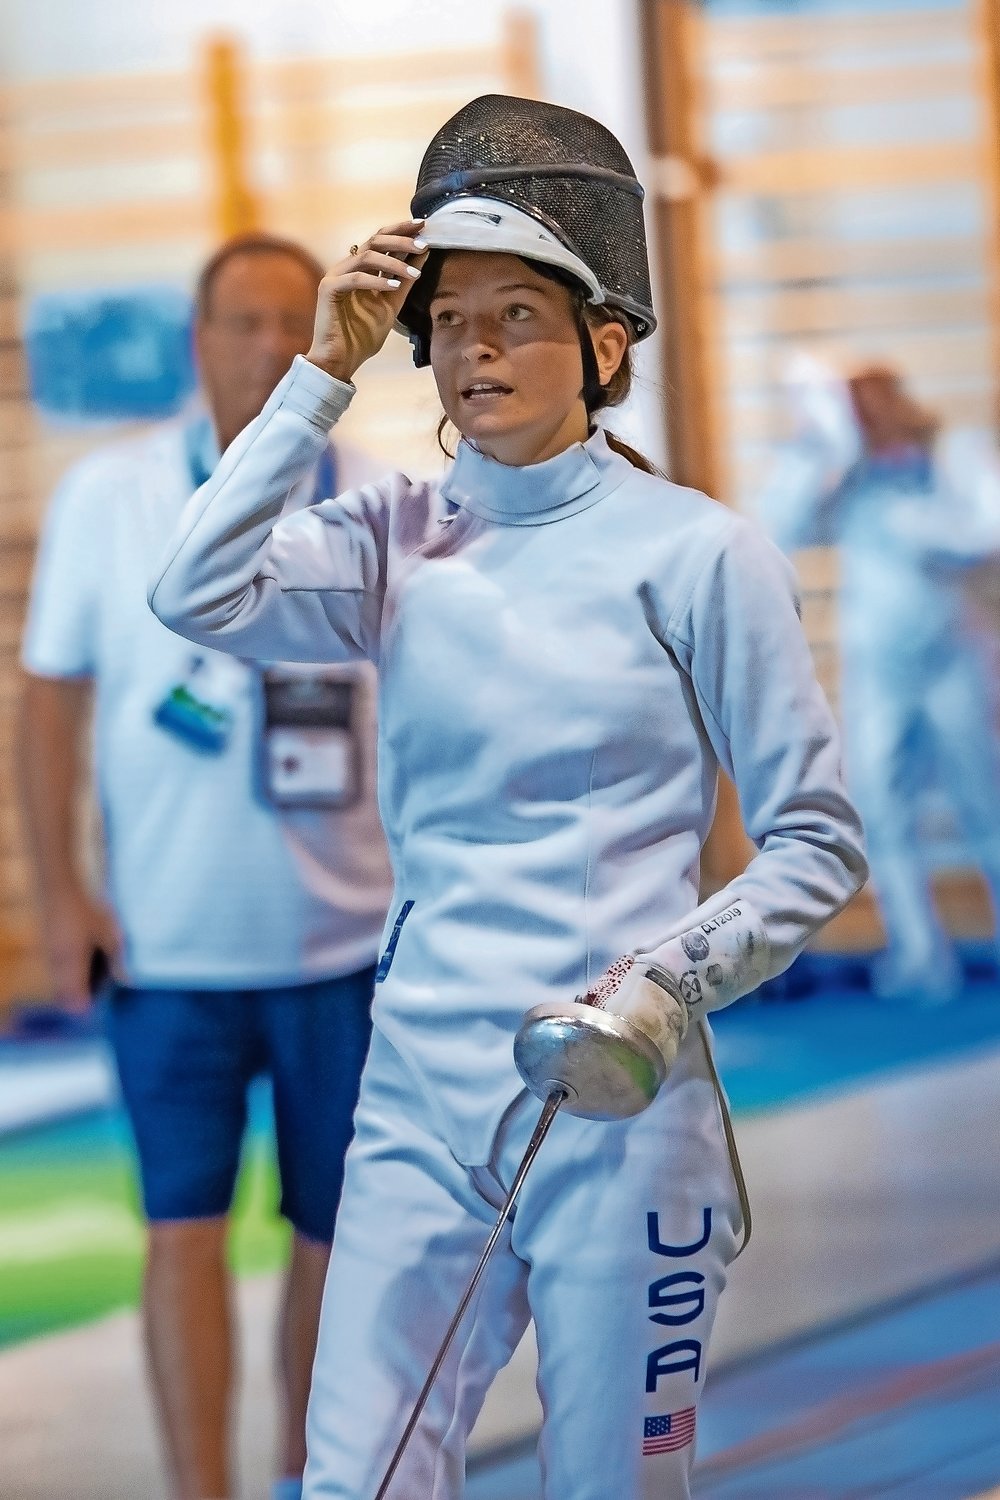 Oyster Bay High School fencer Rachel Kowalsky took home to gold medals at the 2019 European Maccabi Games.